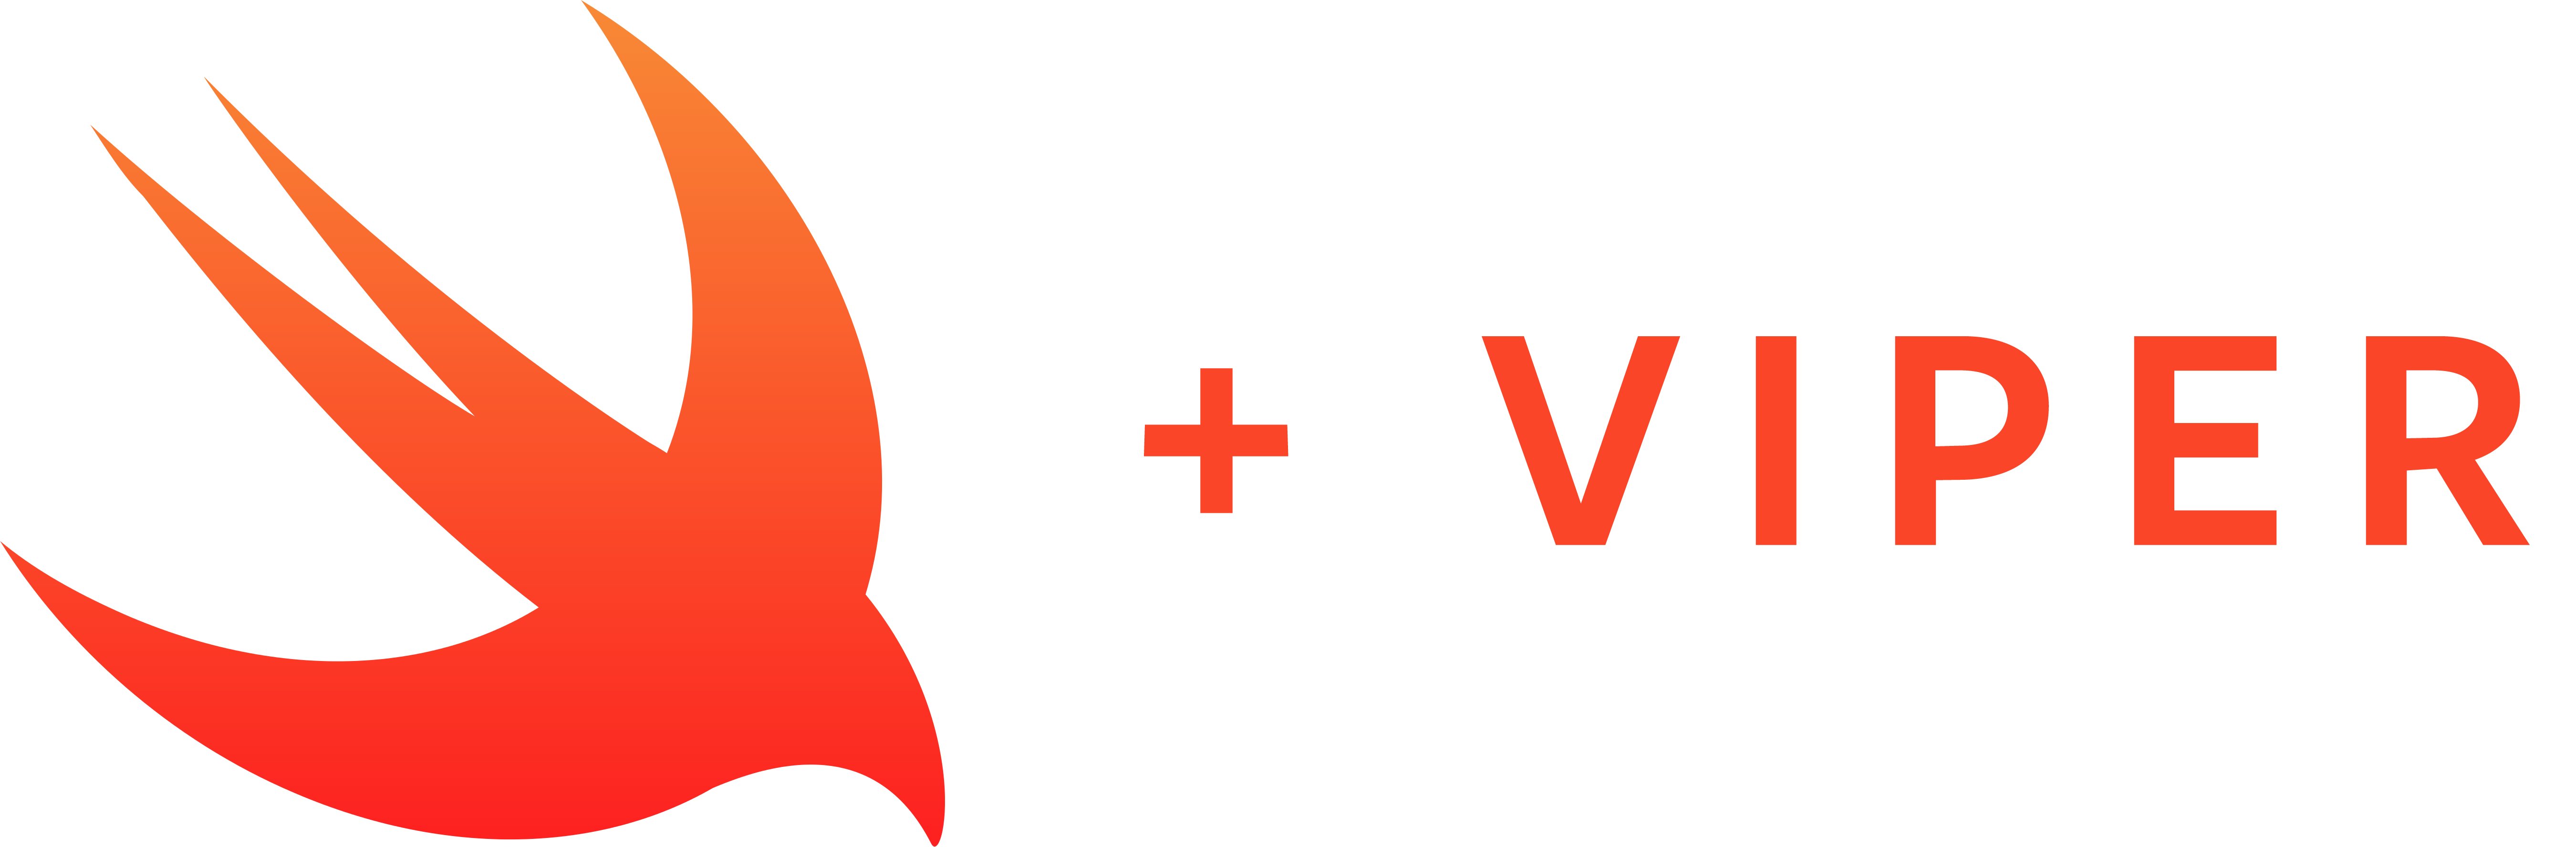 Writing an app with VIPER architecture - Part 1